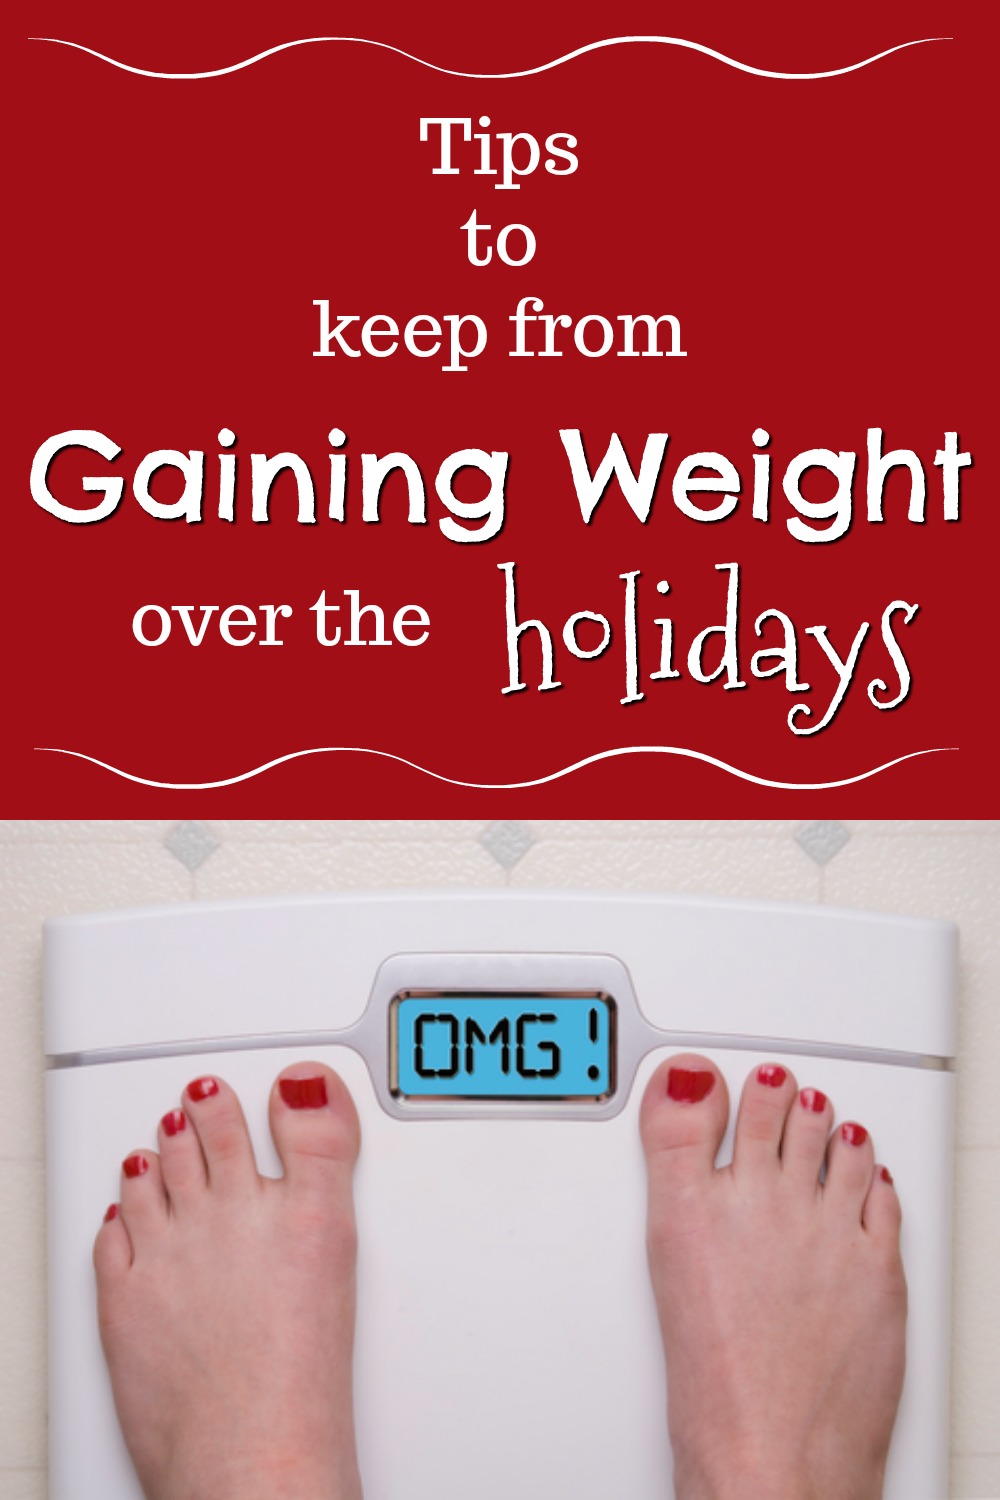 tips to keep from gaining weight over the holidays